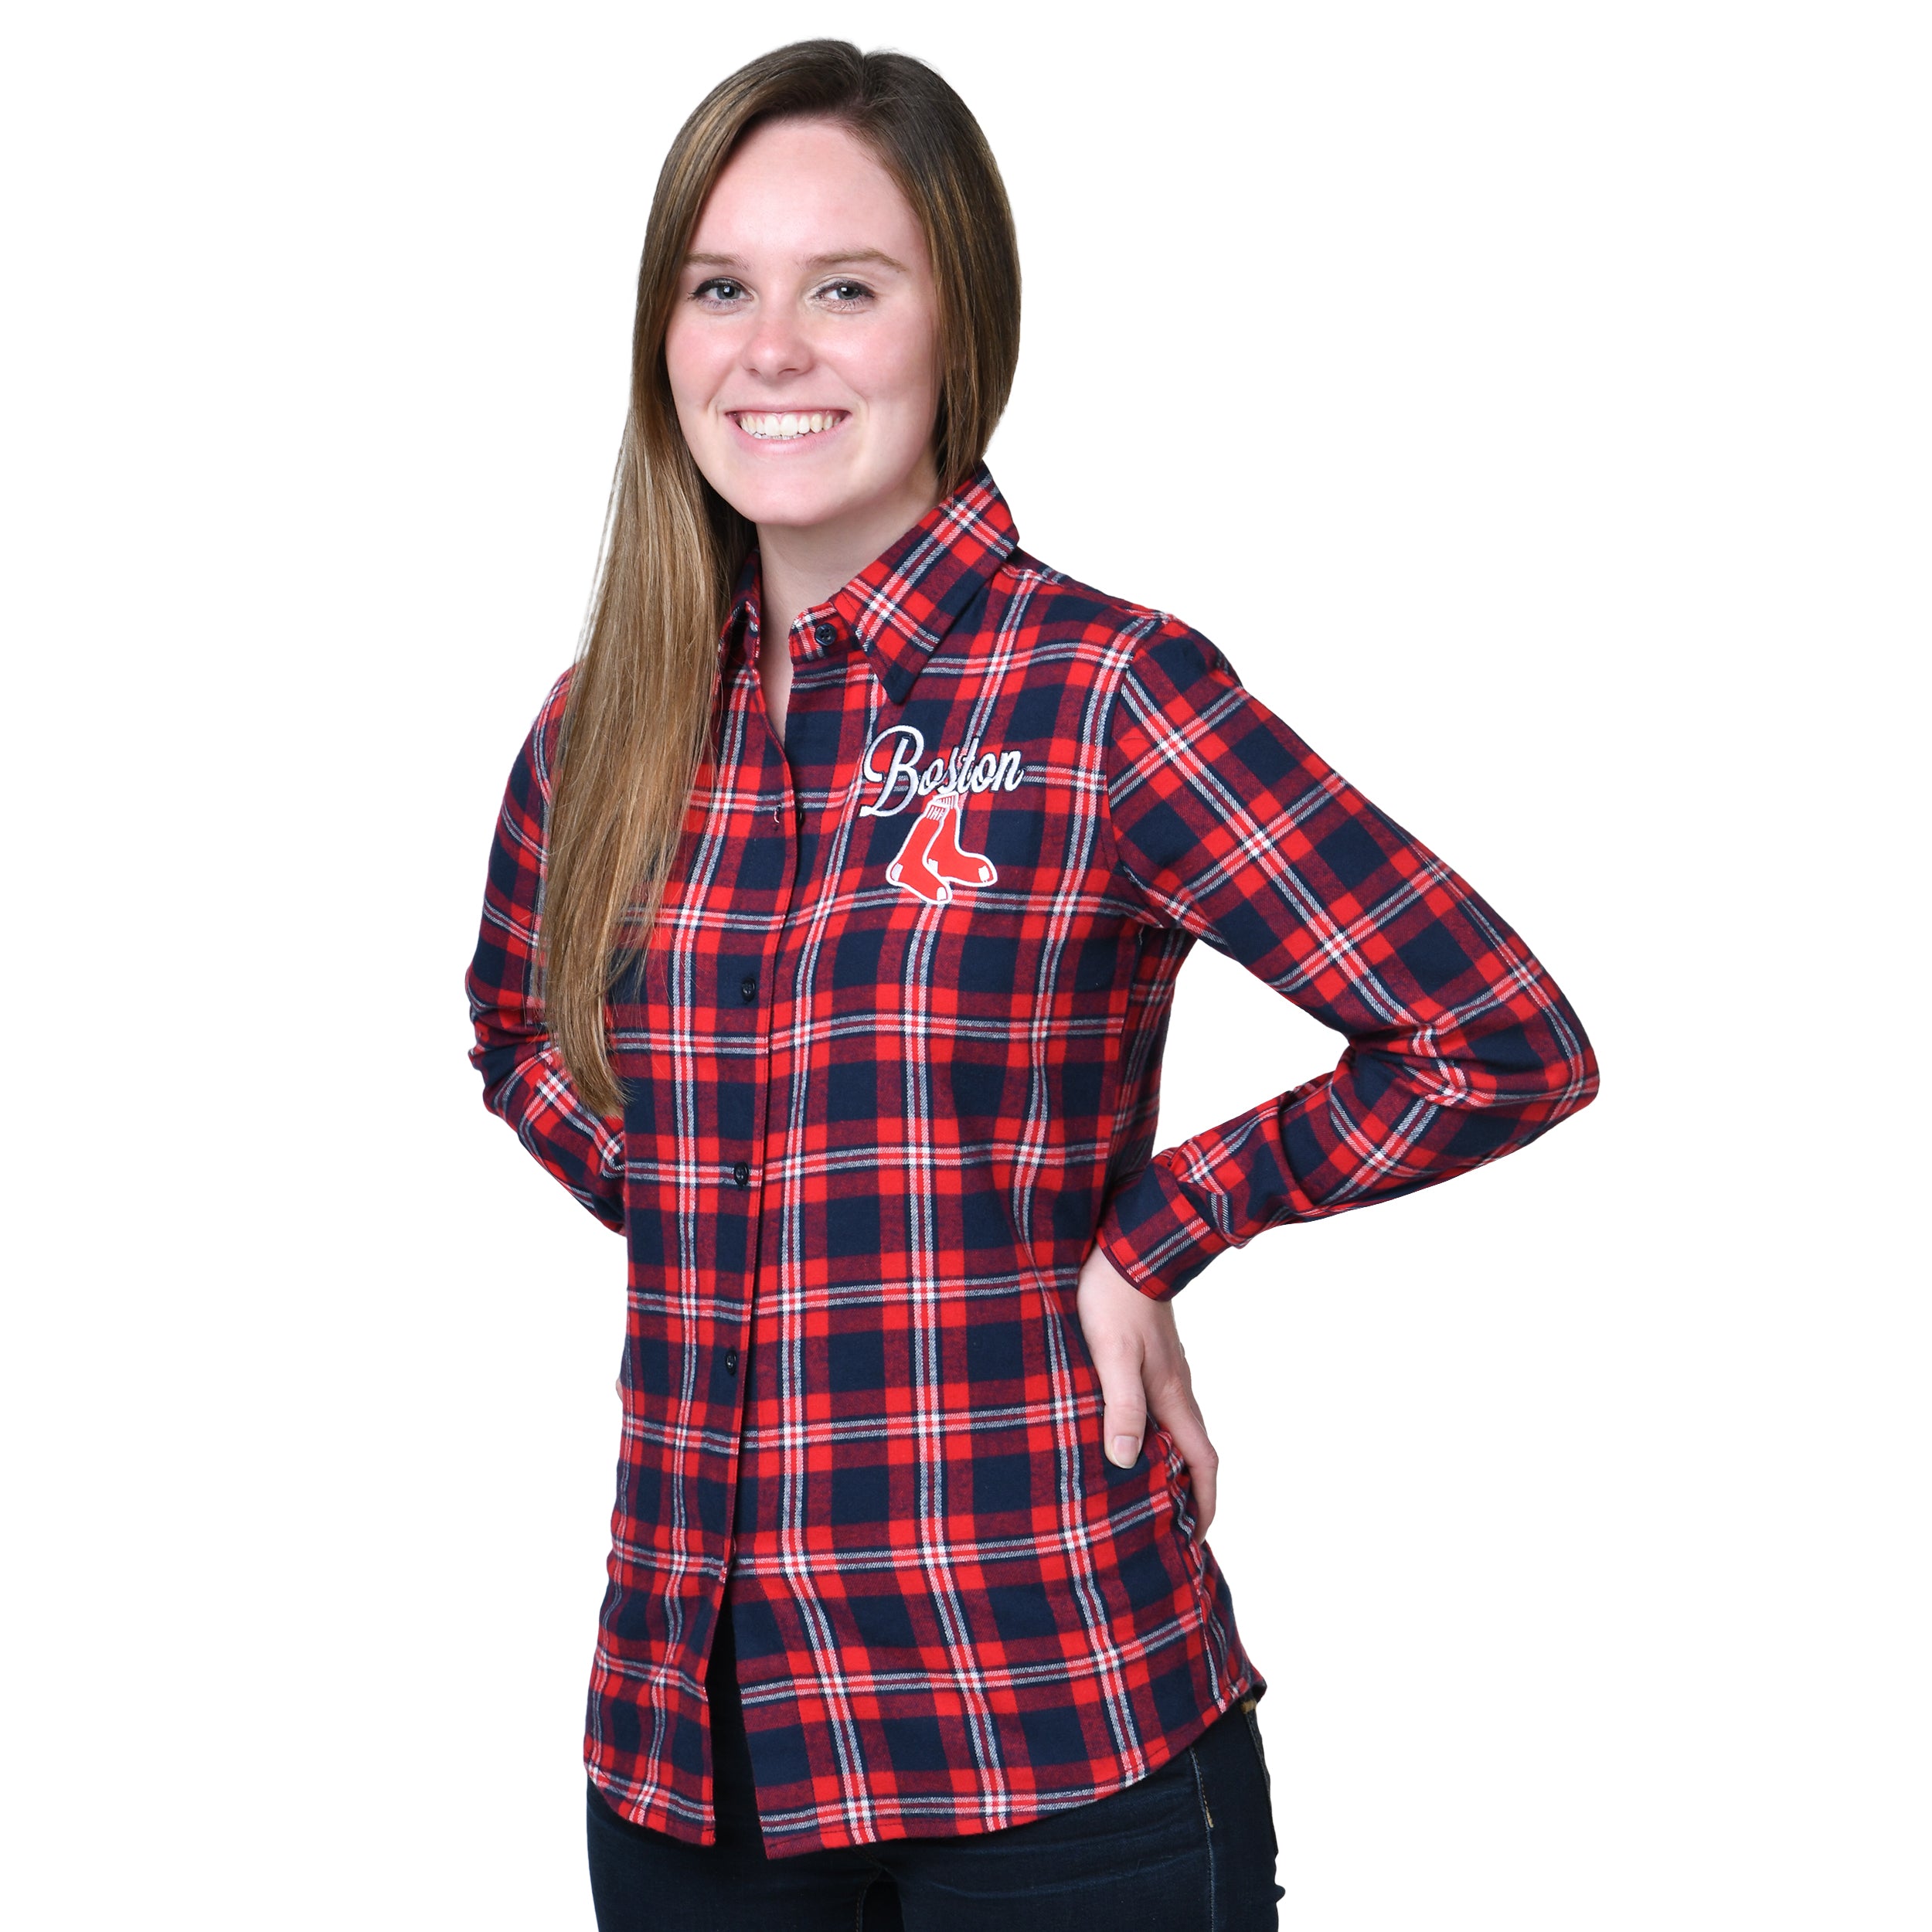 FOCO Boston Red Sox Women's Flannel Button-Up Long Sleeve Shirt - Navy